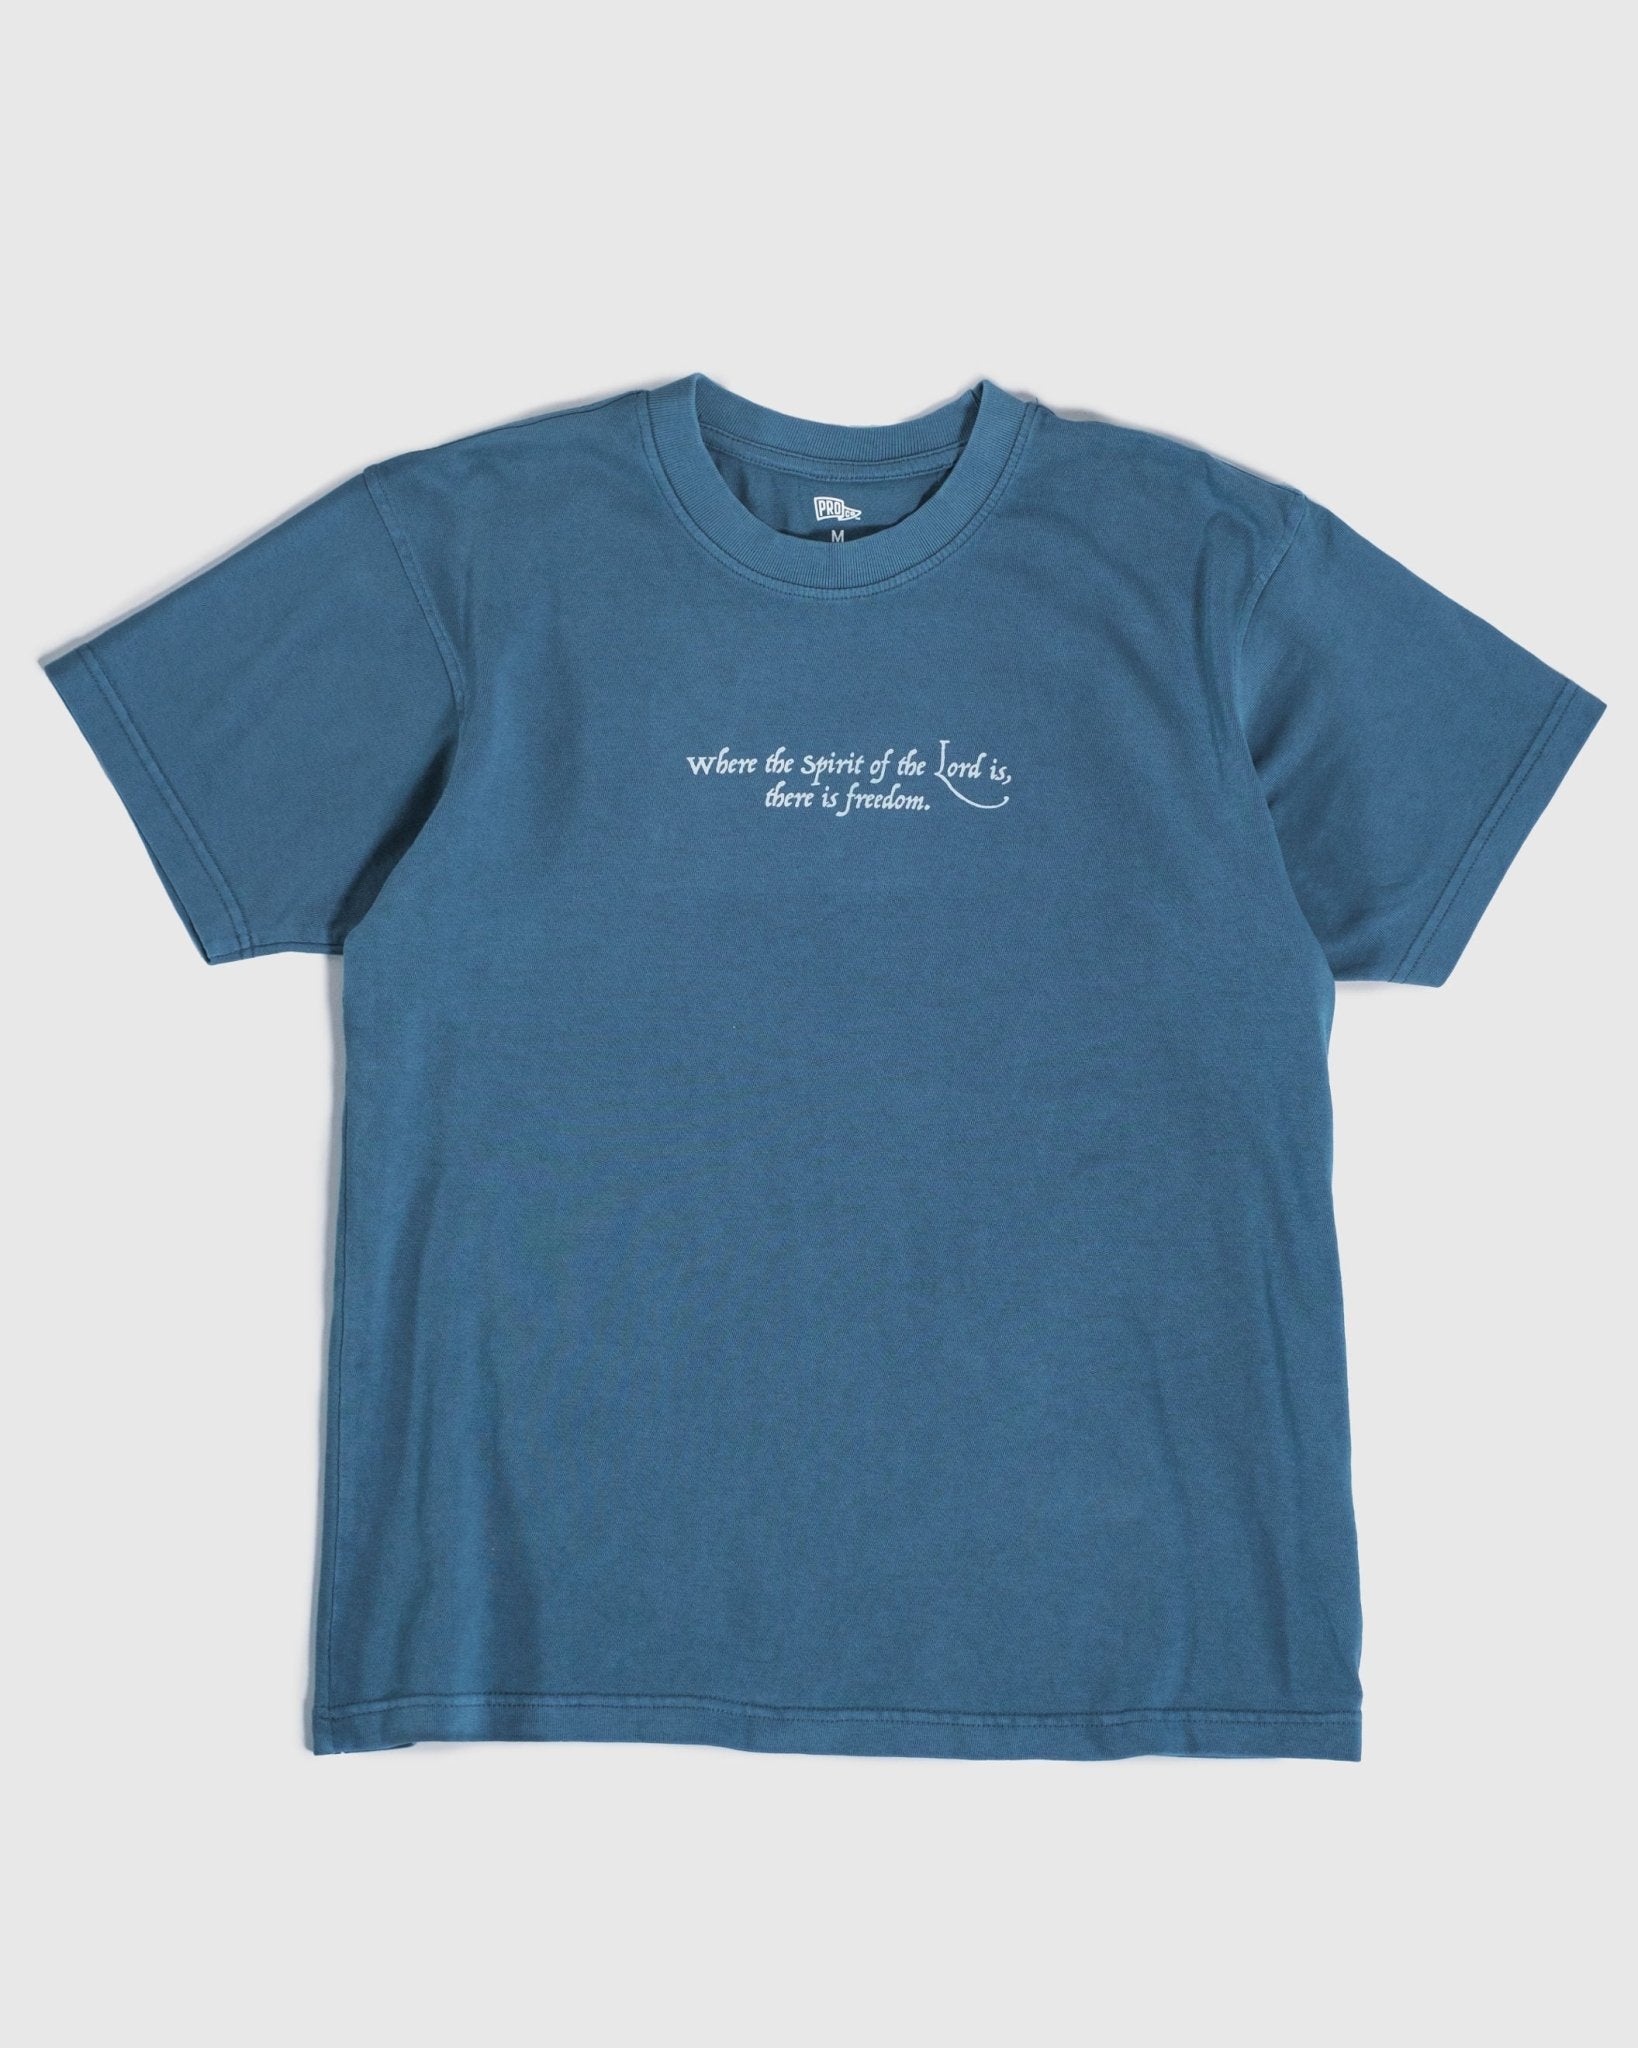 "There is Freedom" Faded Blue Heavyweight Tee - Proclamation Coalition